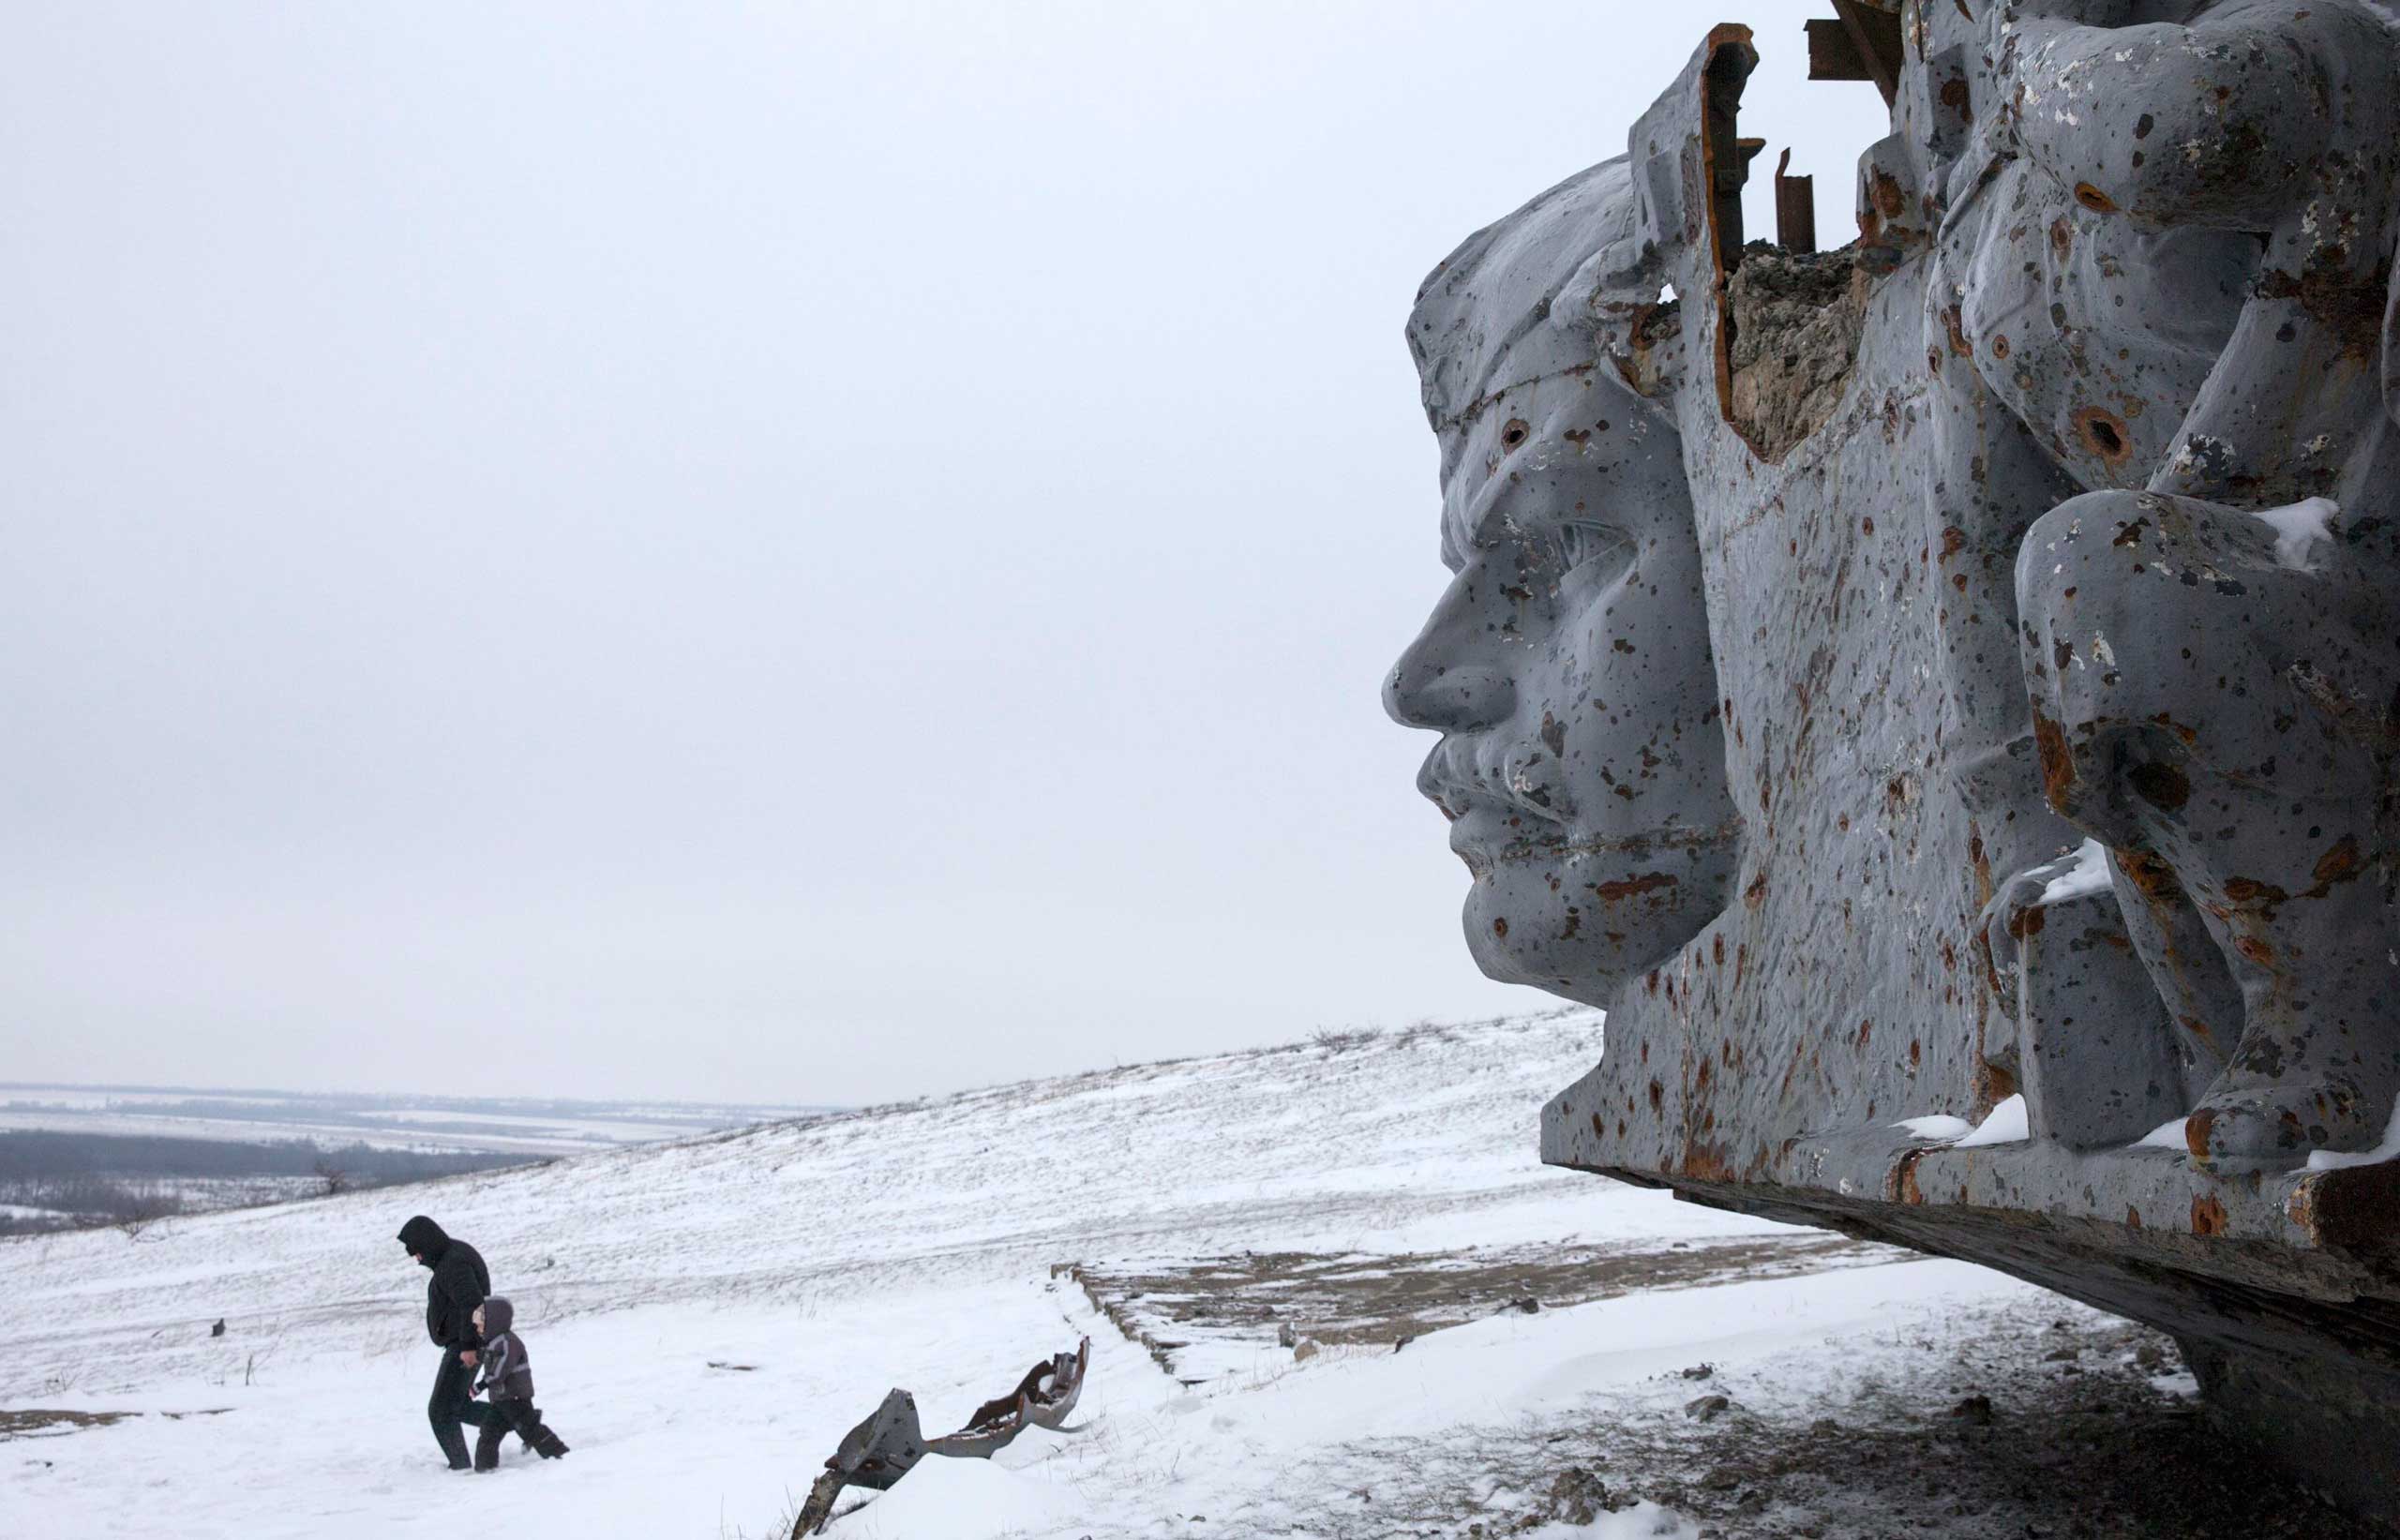 Dec. 7, 2014. A man and a child walk in the snow near the World War II memorial of the fallen Red Army soldiers at Savur-Mohyla, a hill east of the city of Donetsk. The memorial was destroyed after enduring heavy shelling during the conflict between the Ukraine Army and pro-Russian rebels.